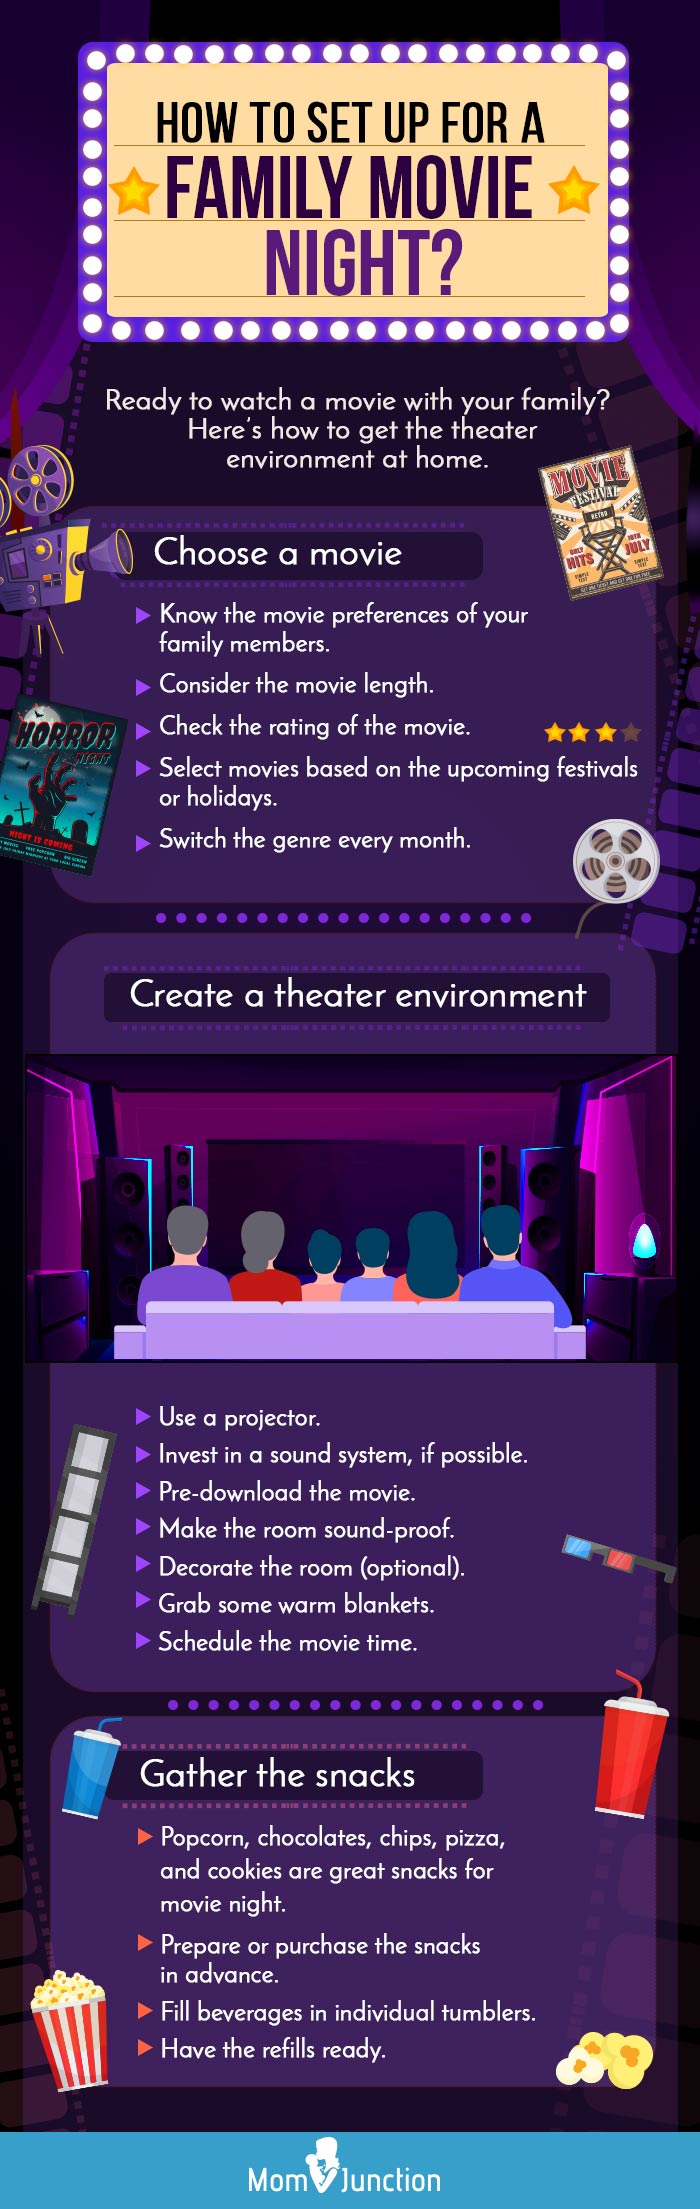 how to set up for a family movie night (infographic)